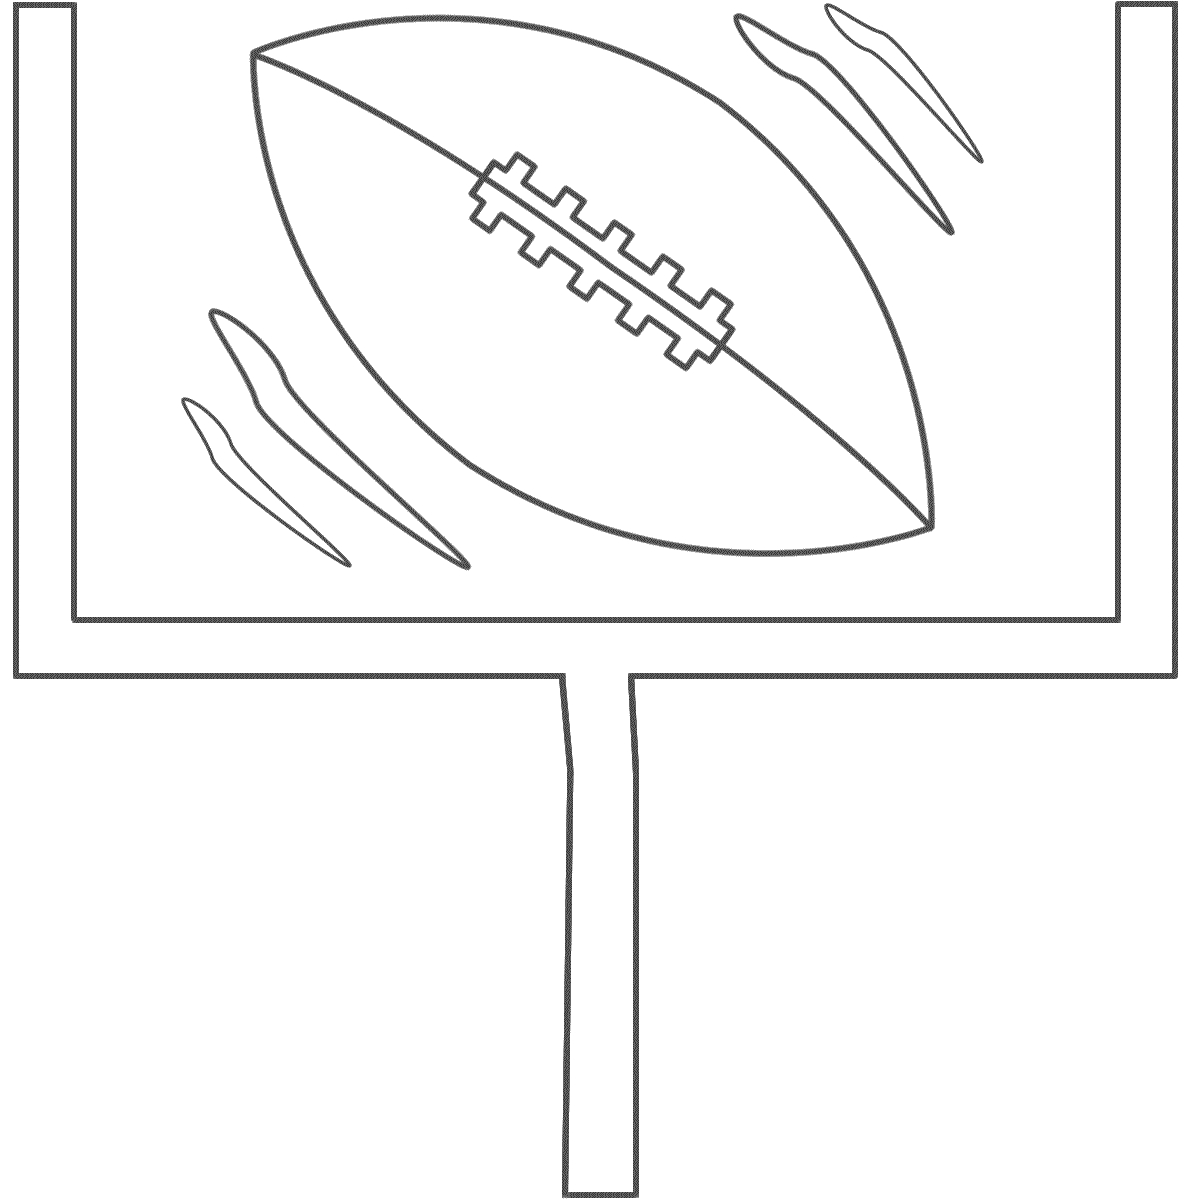 Super Bowl Coloring Pages Free Football With A Goal Post Coloring Page Super Bowl Coloring Home